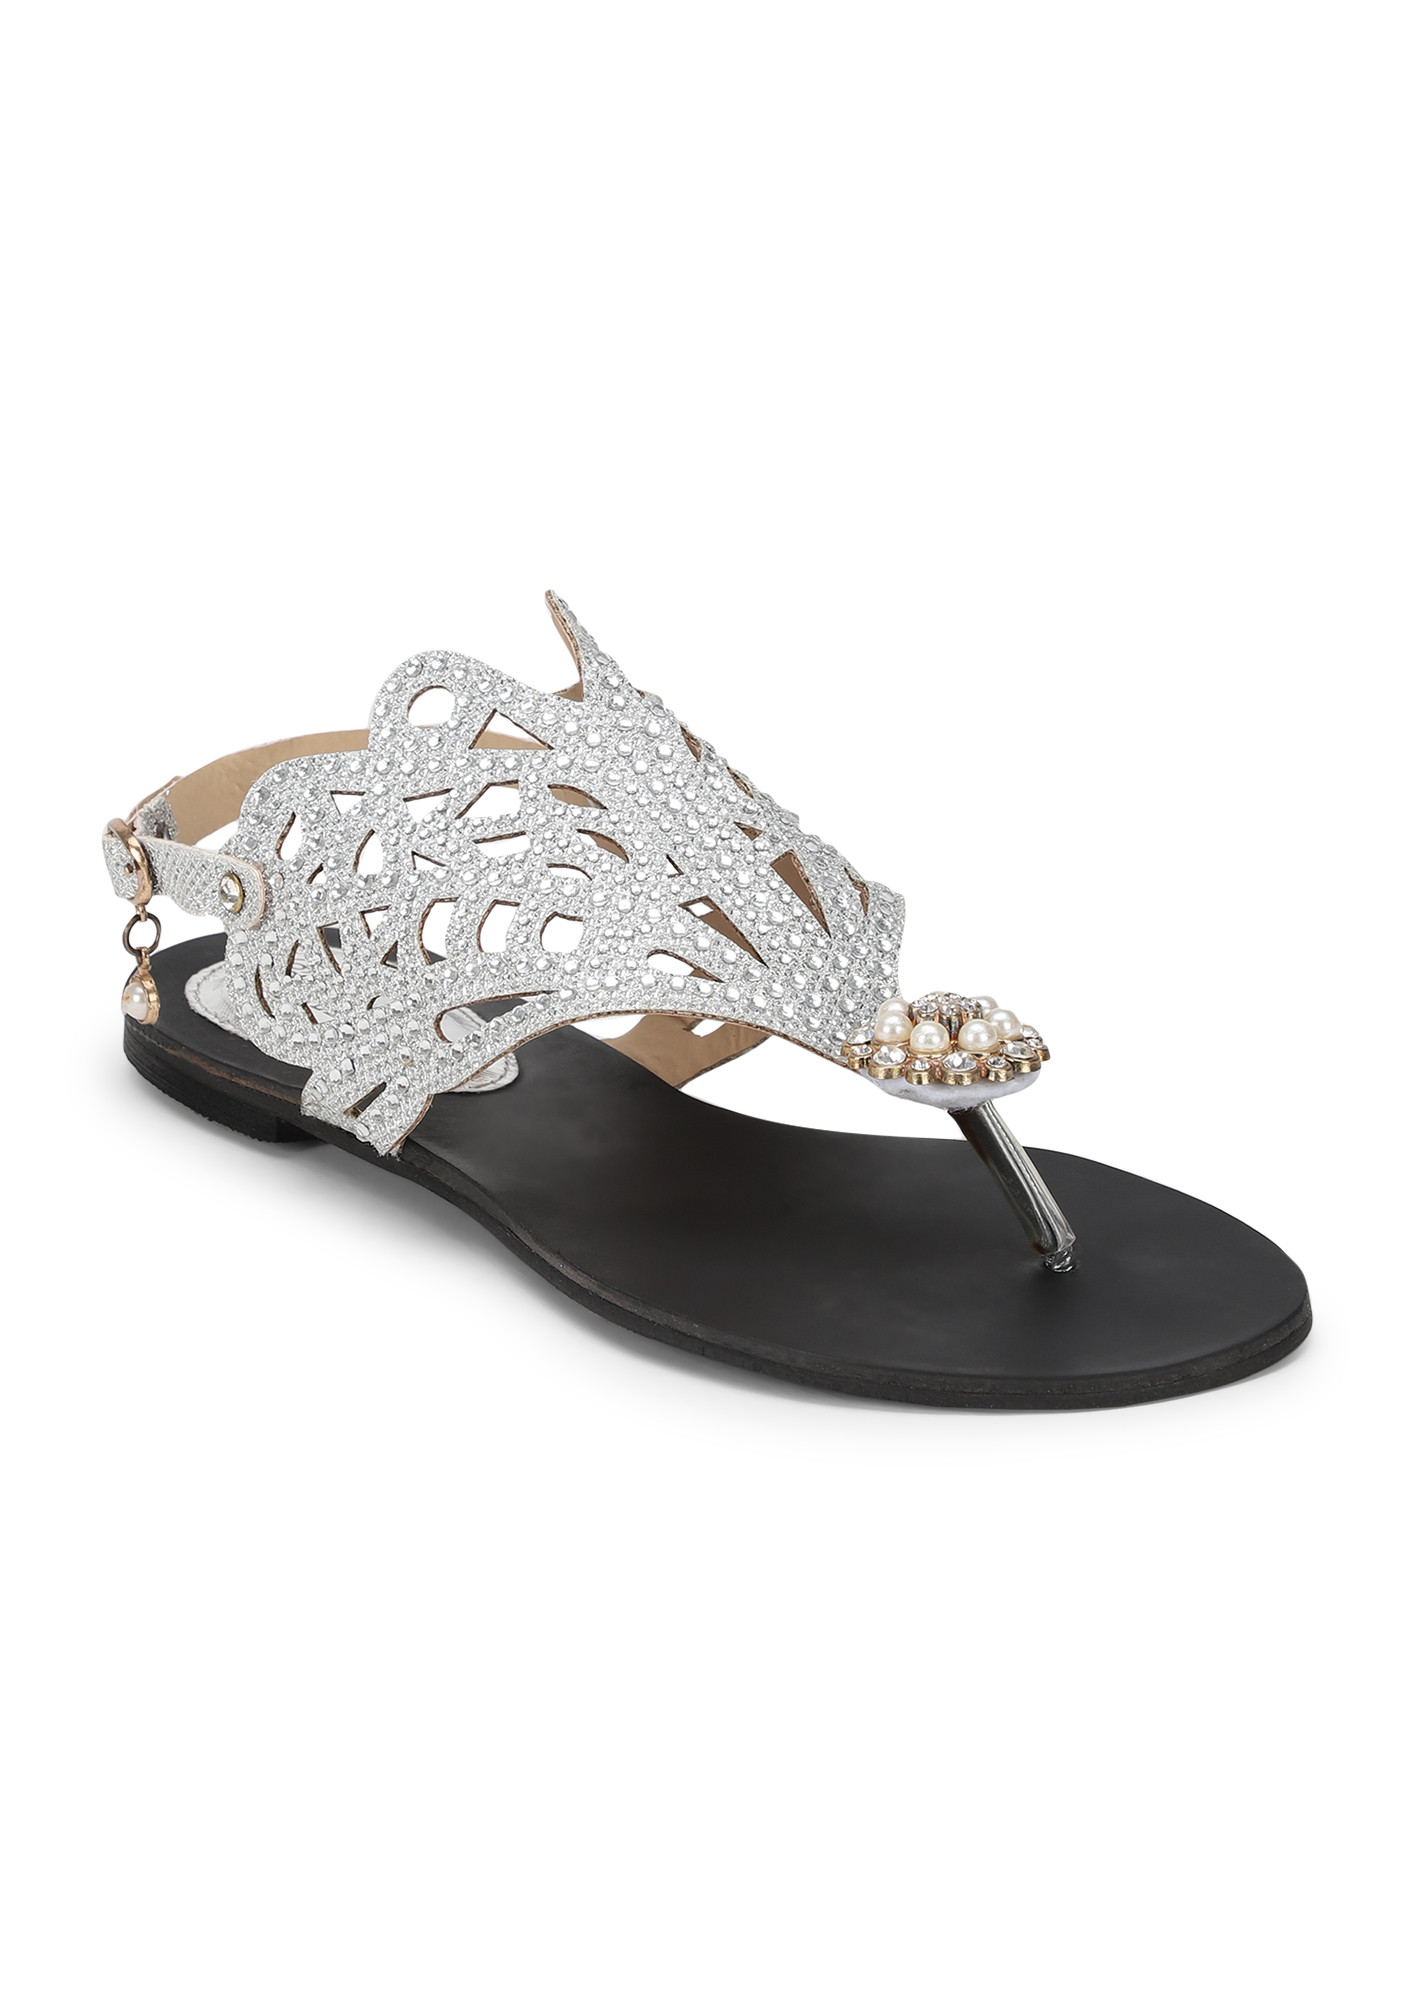 THE SURREAL EFFECTS SILVER FLAT SANDALS